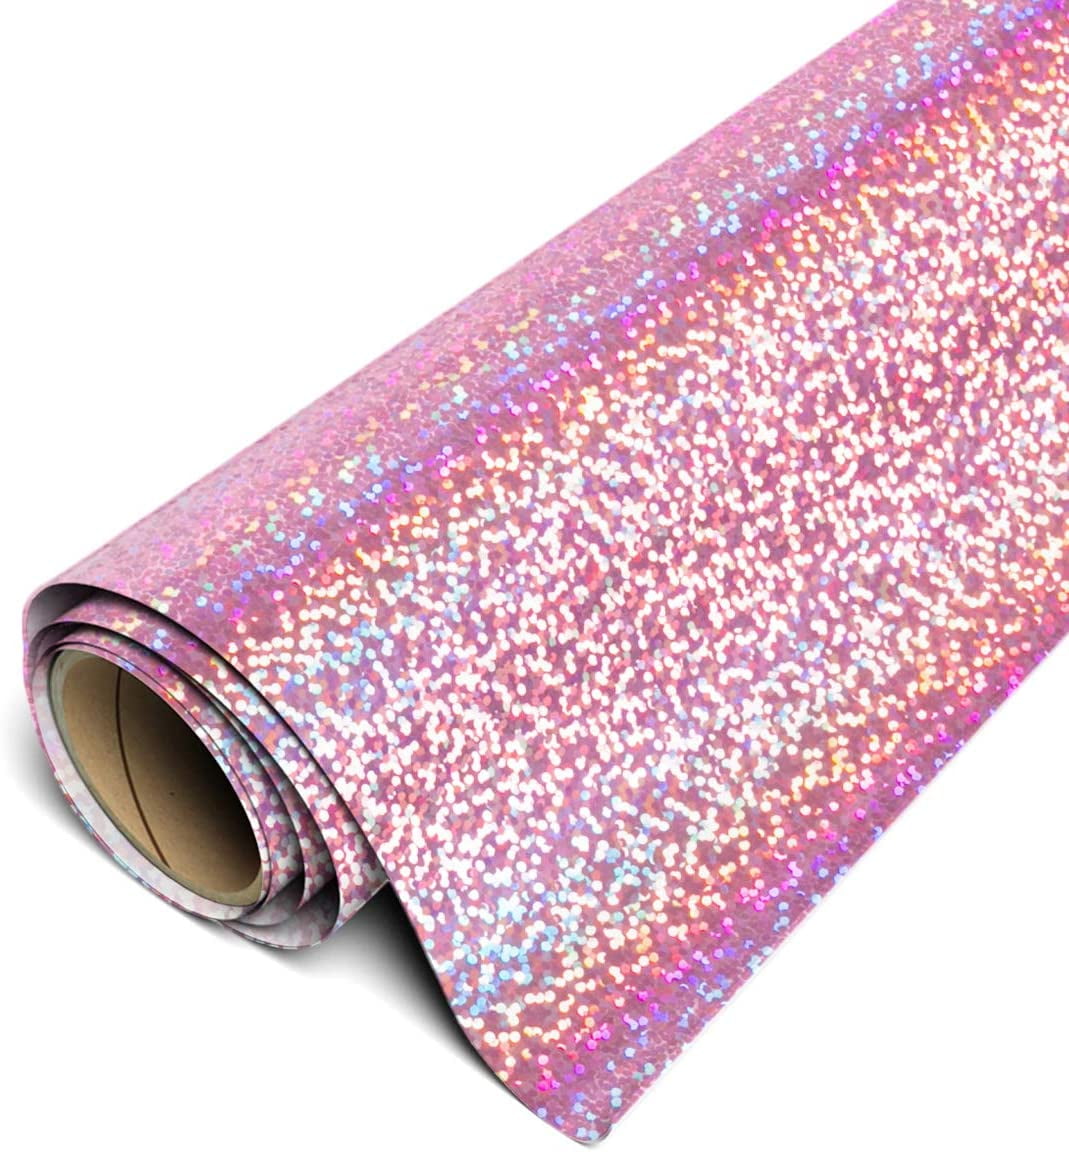 Iridescent Holographic Stretchable Metallic Heat Transfer Vinyl Light Pink  Foil, Iron On HTV Bundle for DIY Your Own Clothes, 12x10 Inch, Pack of 5